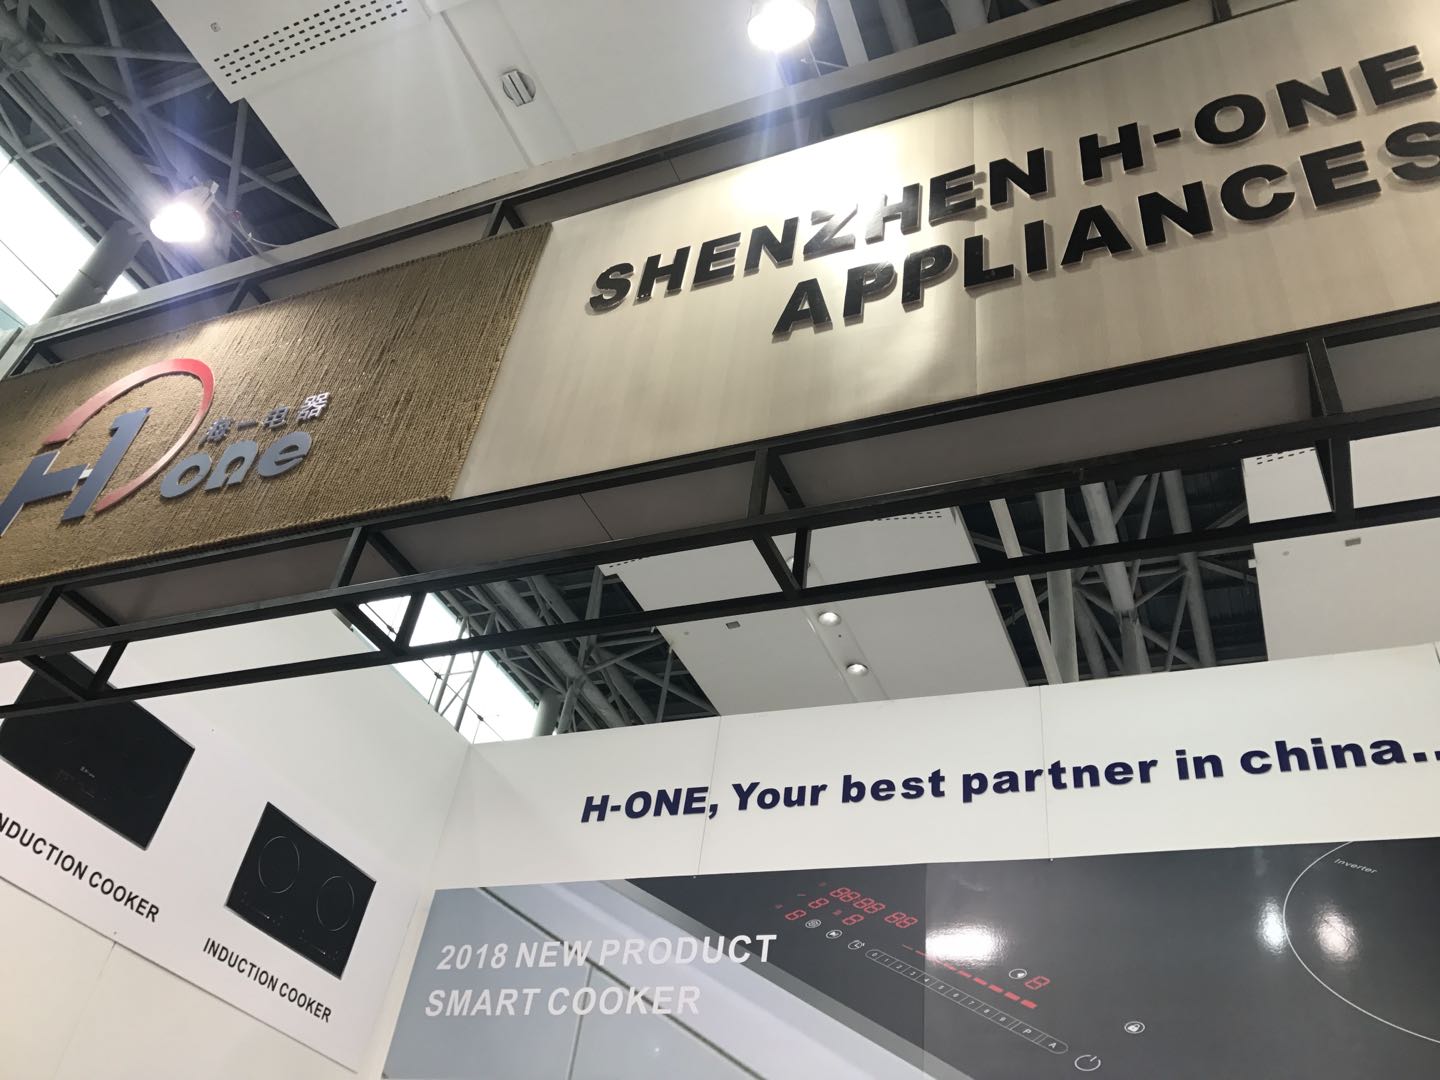 Chine Shenzhen H-one Home Appliances ODM Trade Show Foire de Canton fabricants - H-one